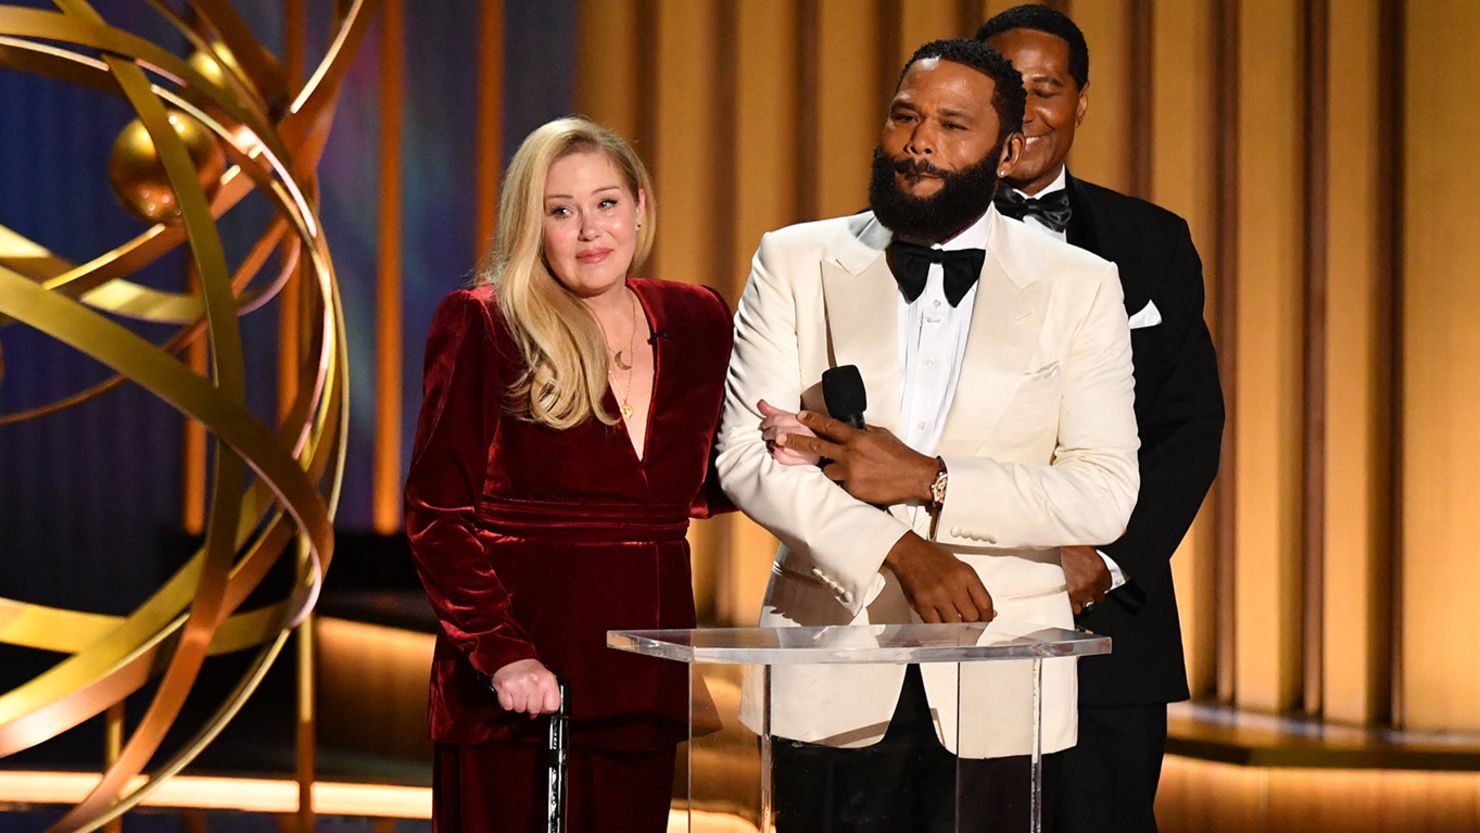 Actor Anthony Anderson and Christina Applegate speak onstage at the Emmy Awards.